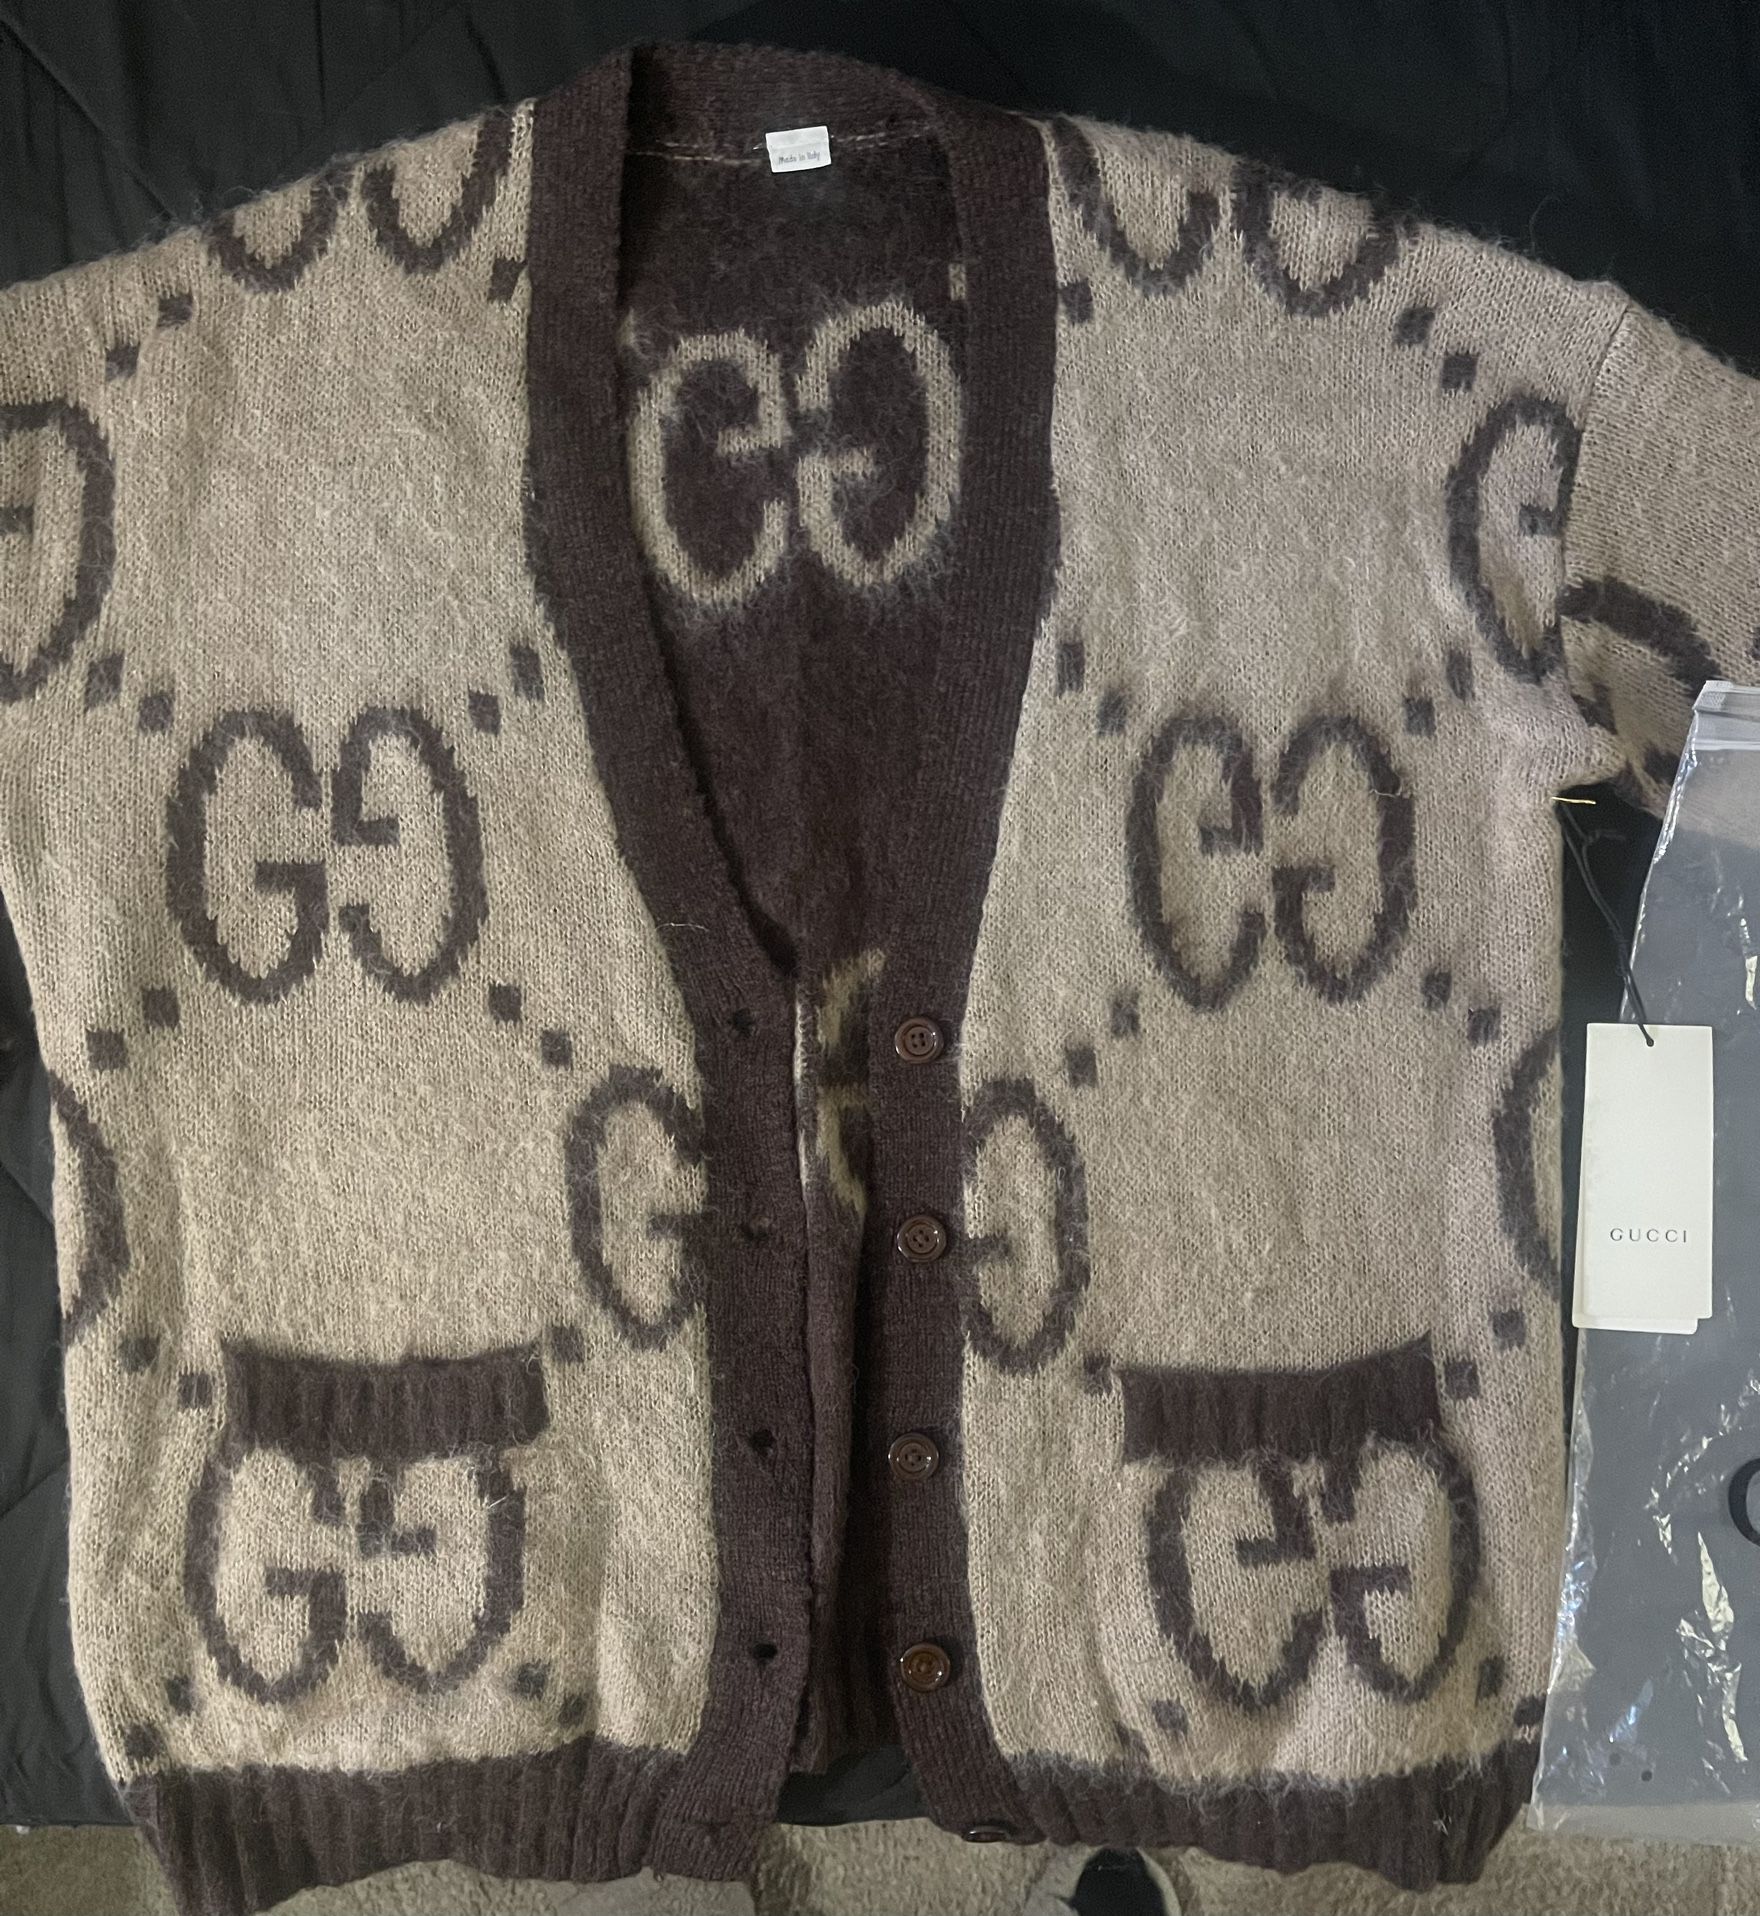 Cardigan Sweater For Him Or Her Size Small To Medium 